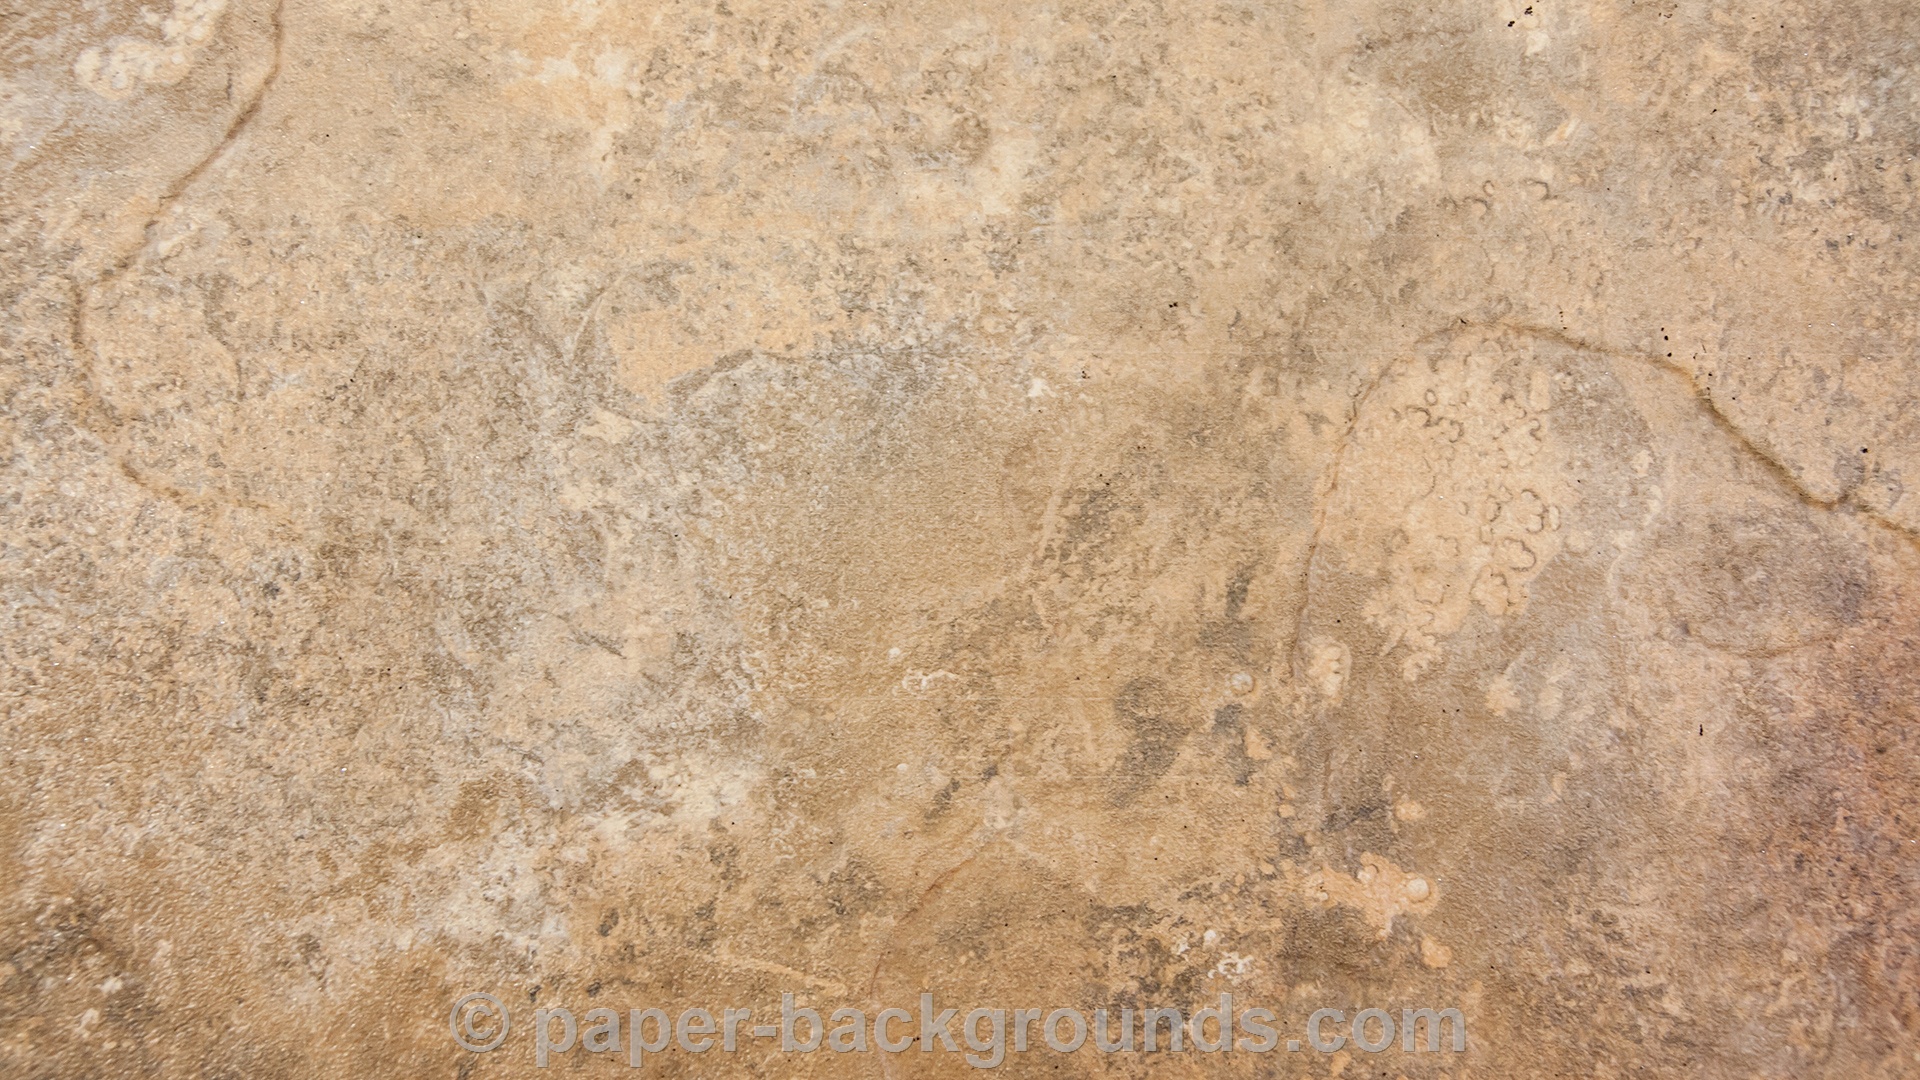 Paper Background Stones Textures Royalty HD